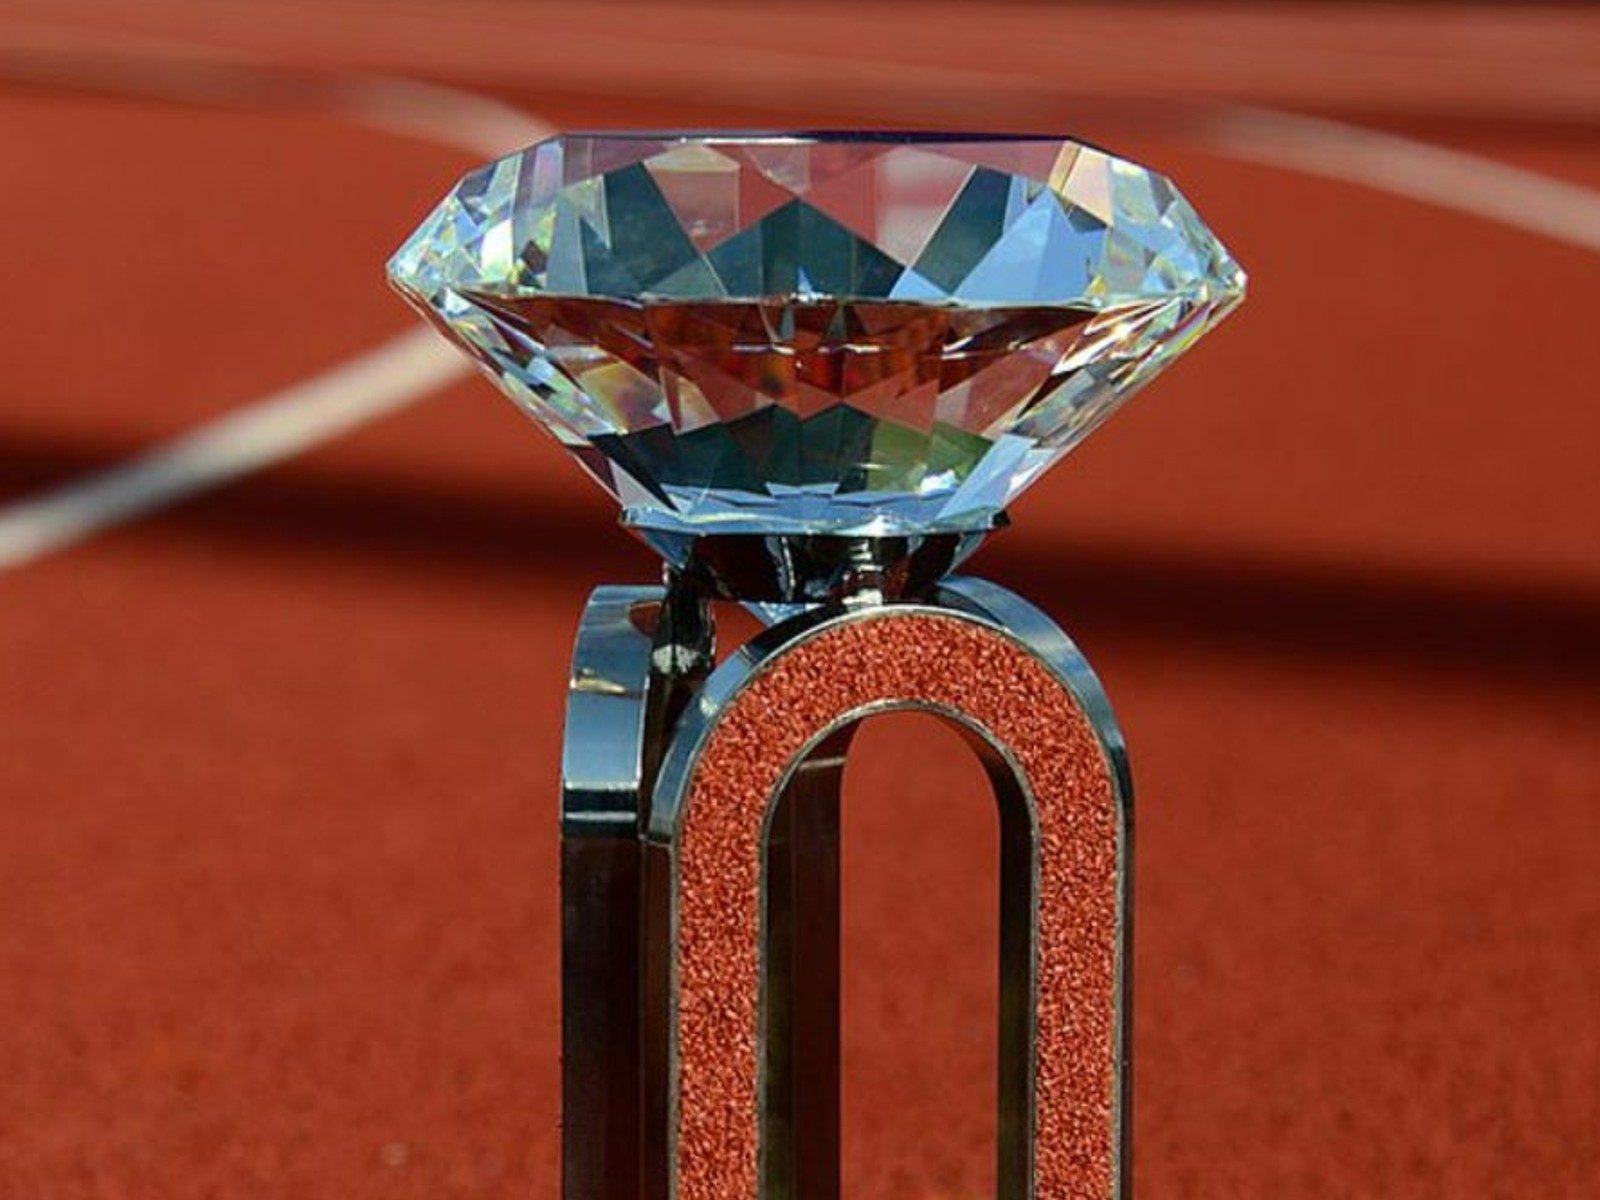 Sports18 Secures Diamond League Rights Until 2024